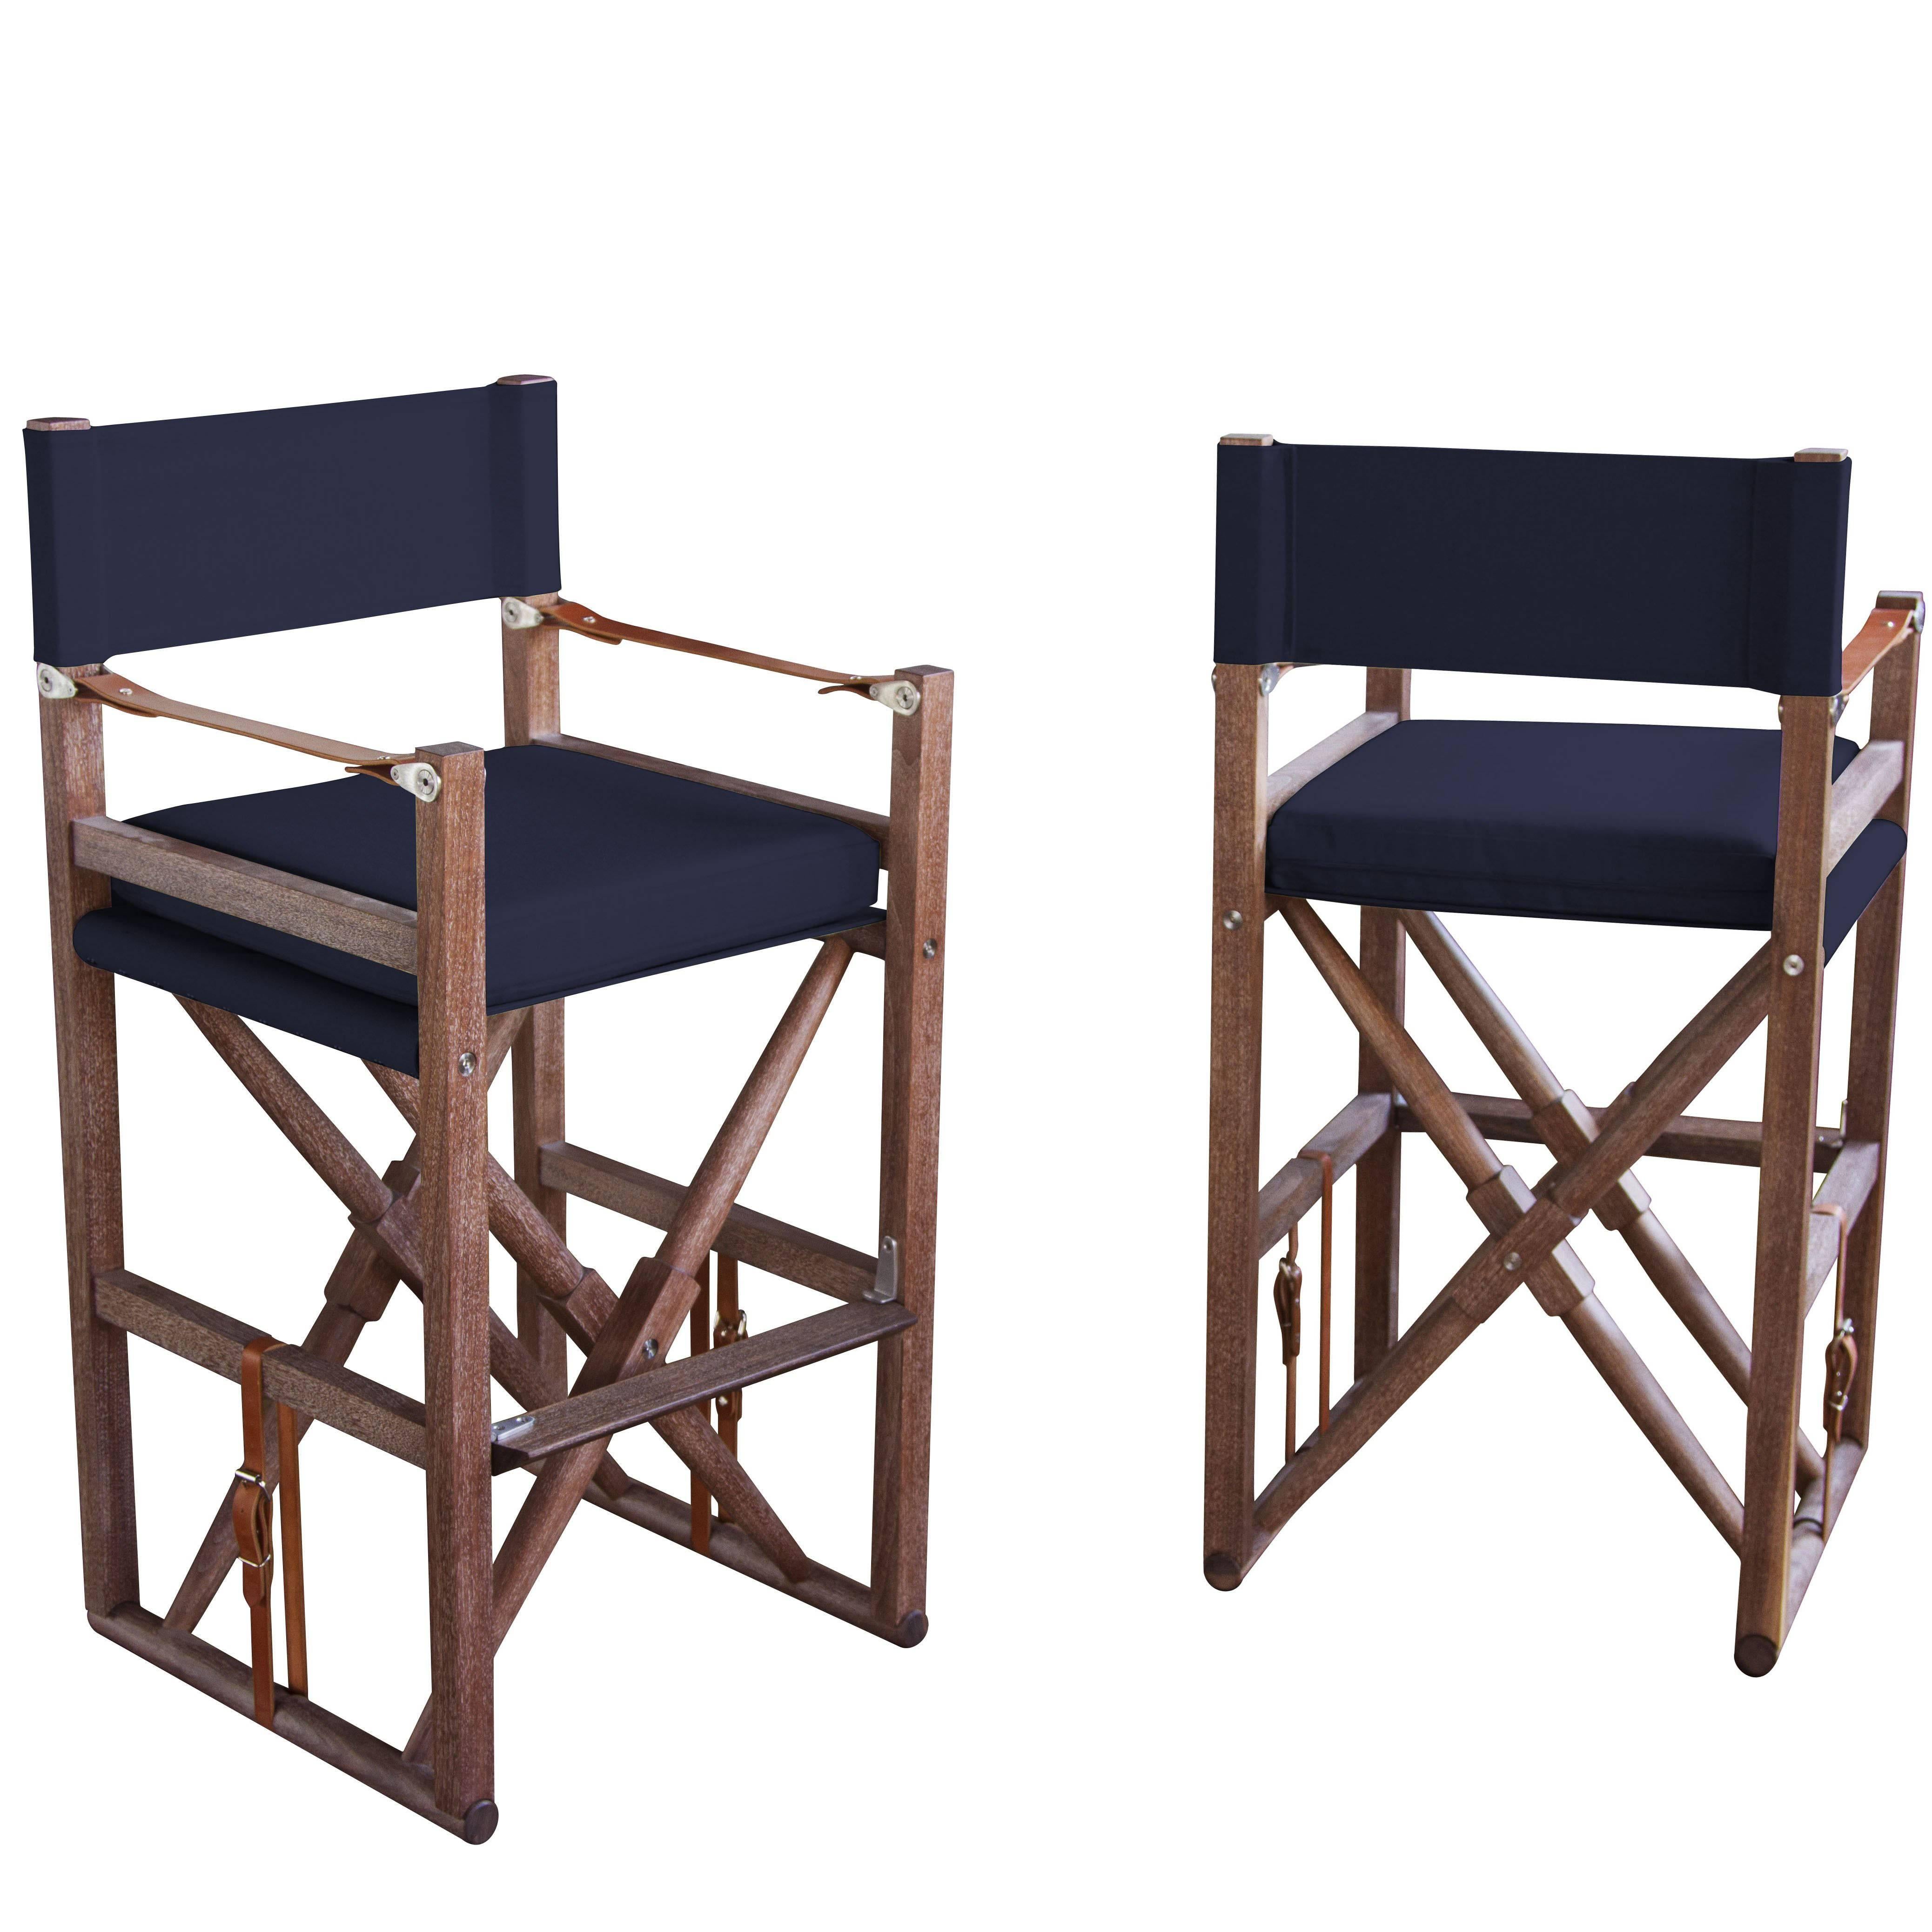 Folding Cabourn Bar Chair - handcrafted by Richard Wrightman Design